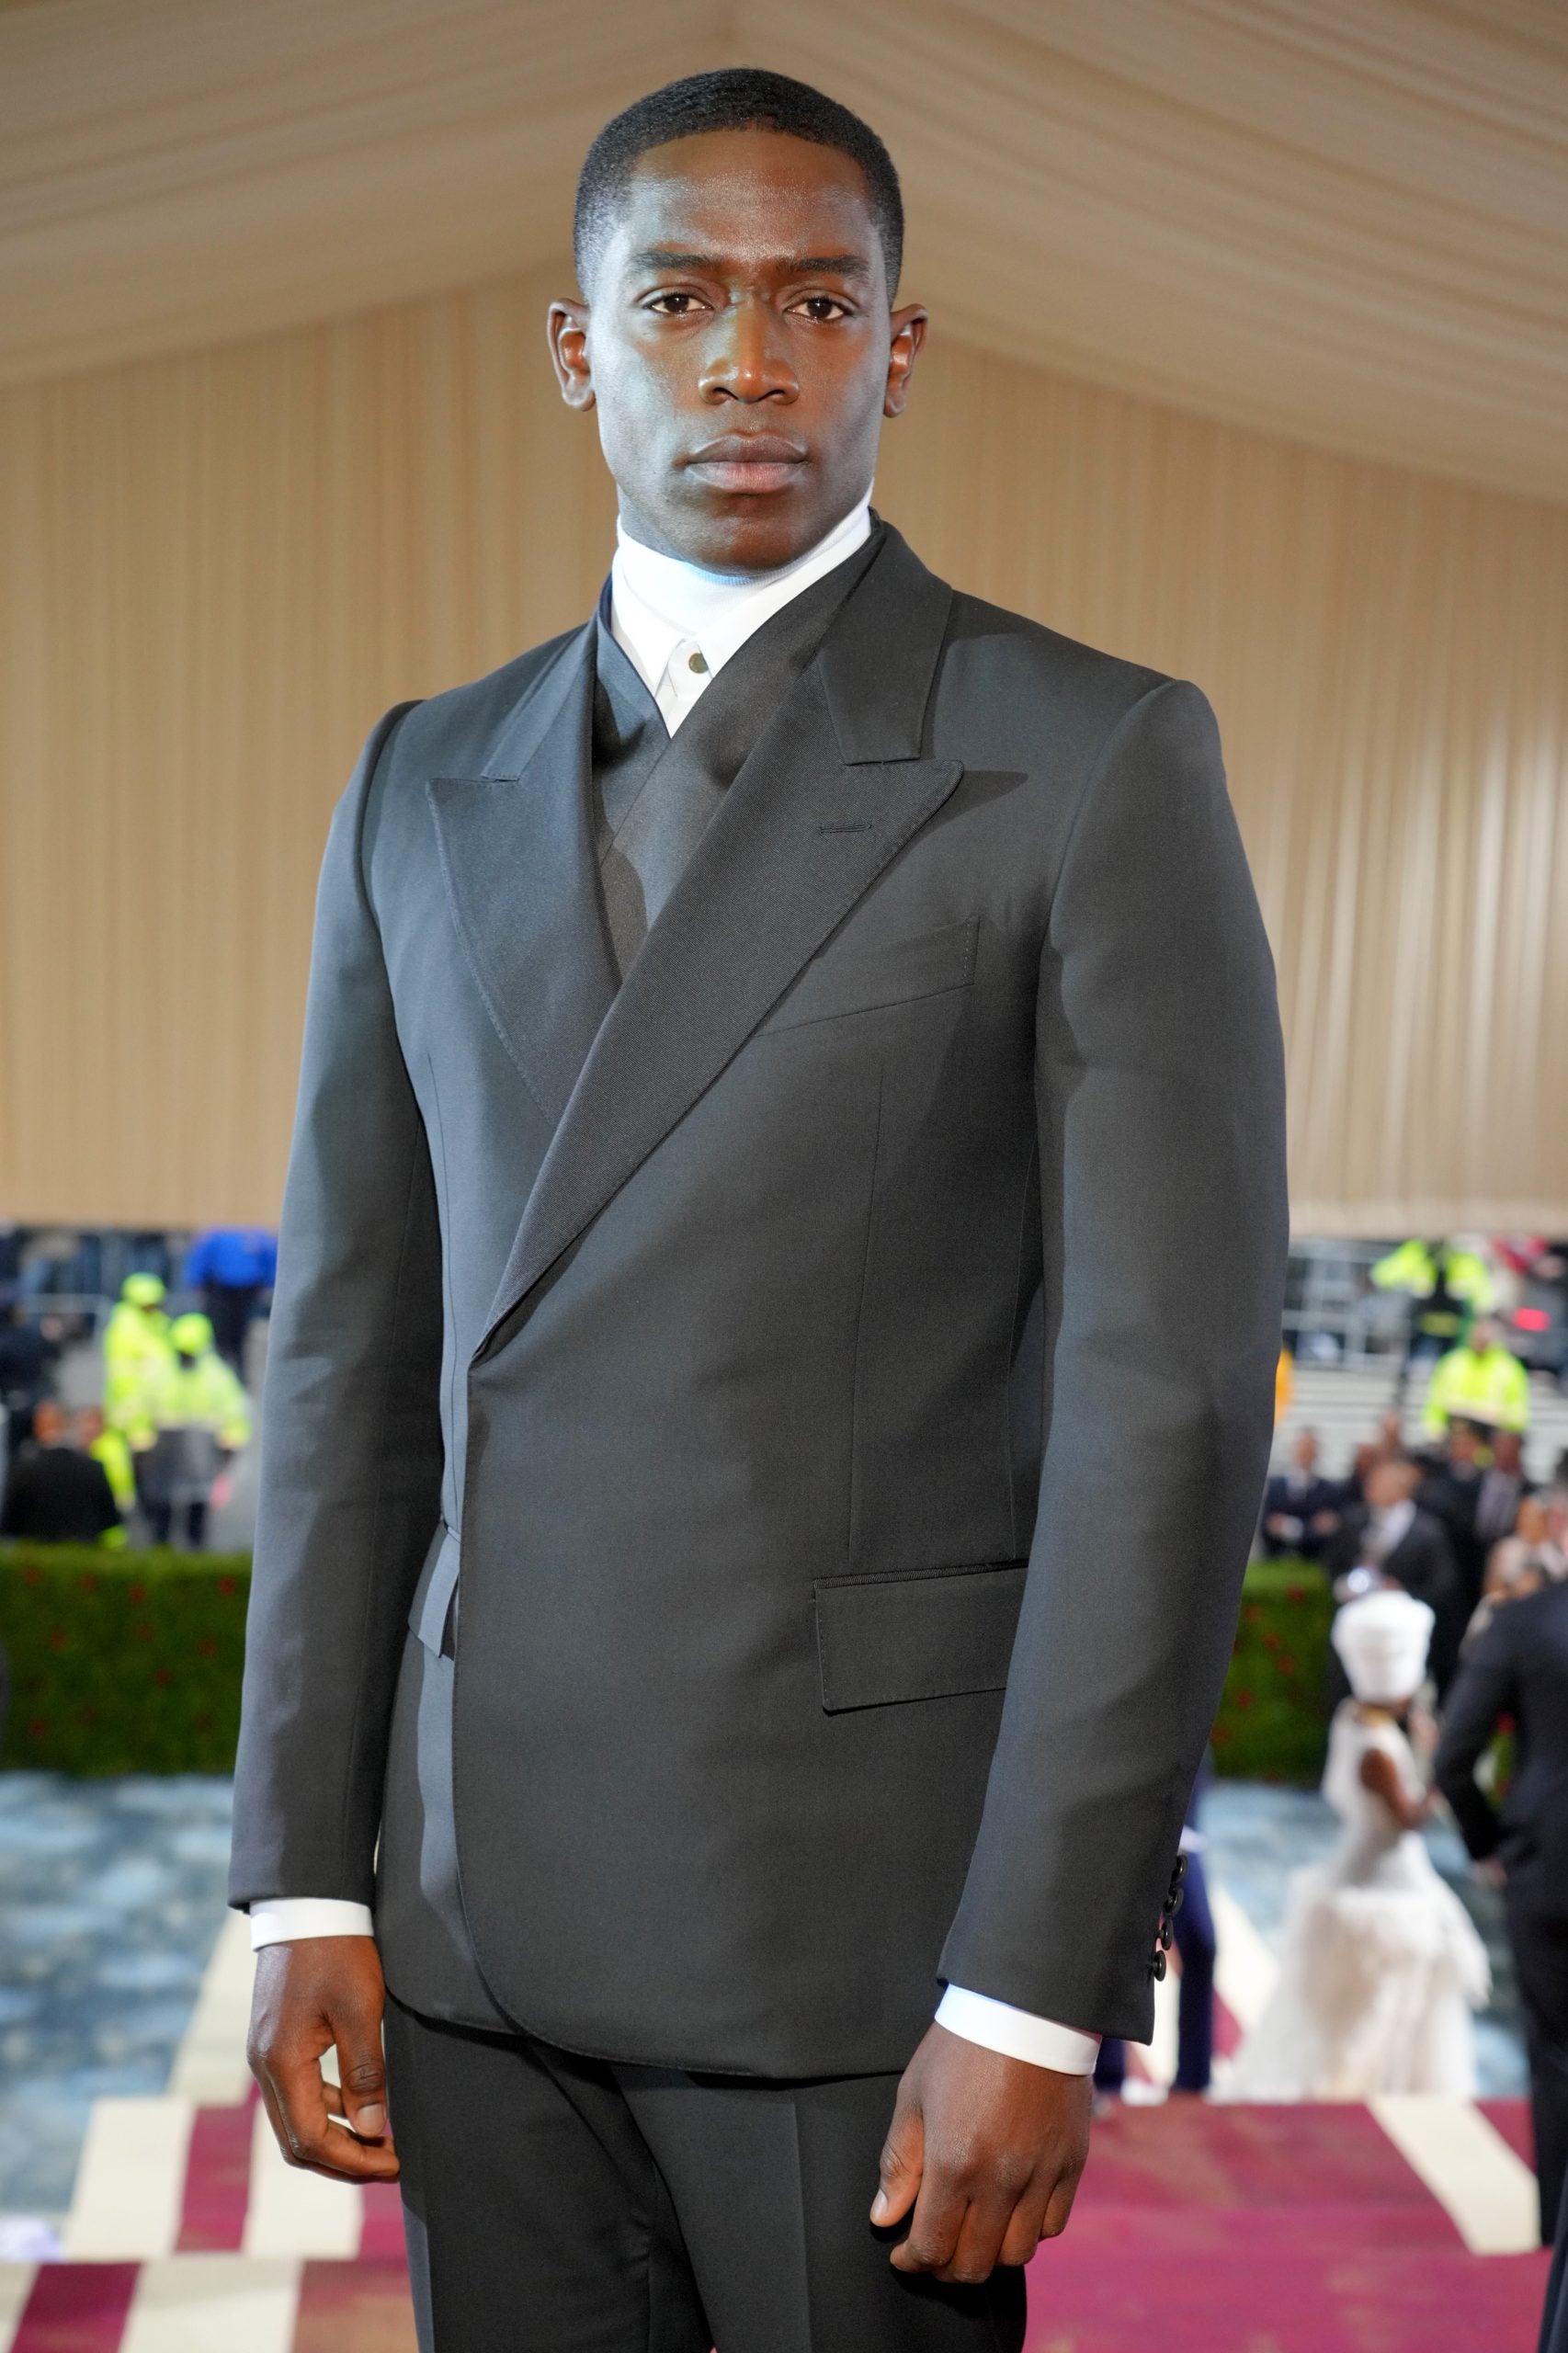 The Fellas Showed Up And Showed Out! Here Are The Best Male Looks From The 2022 Met Gala